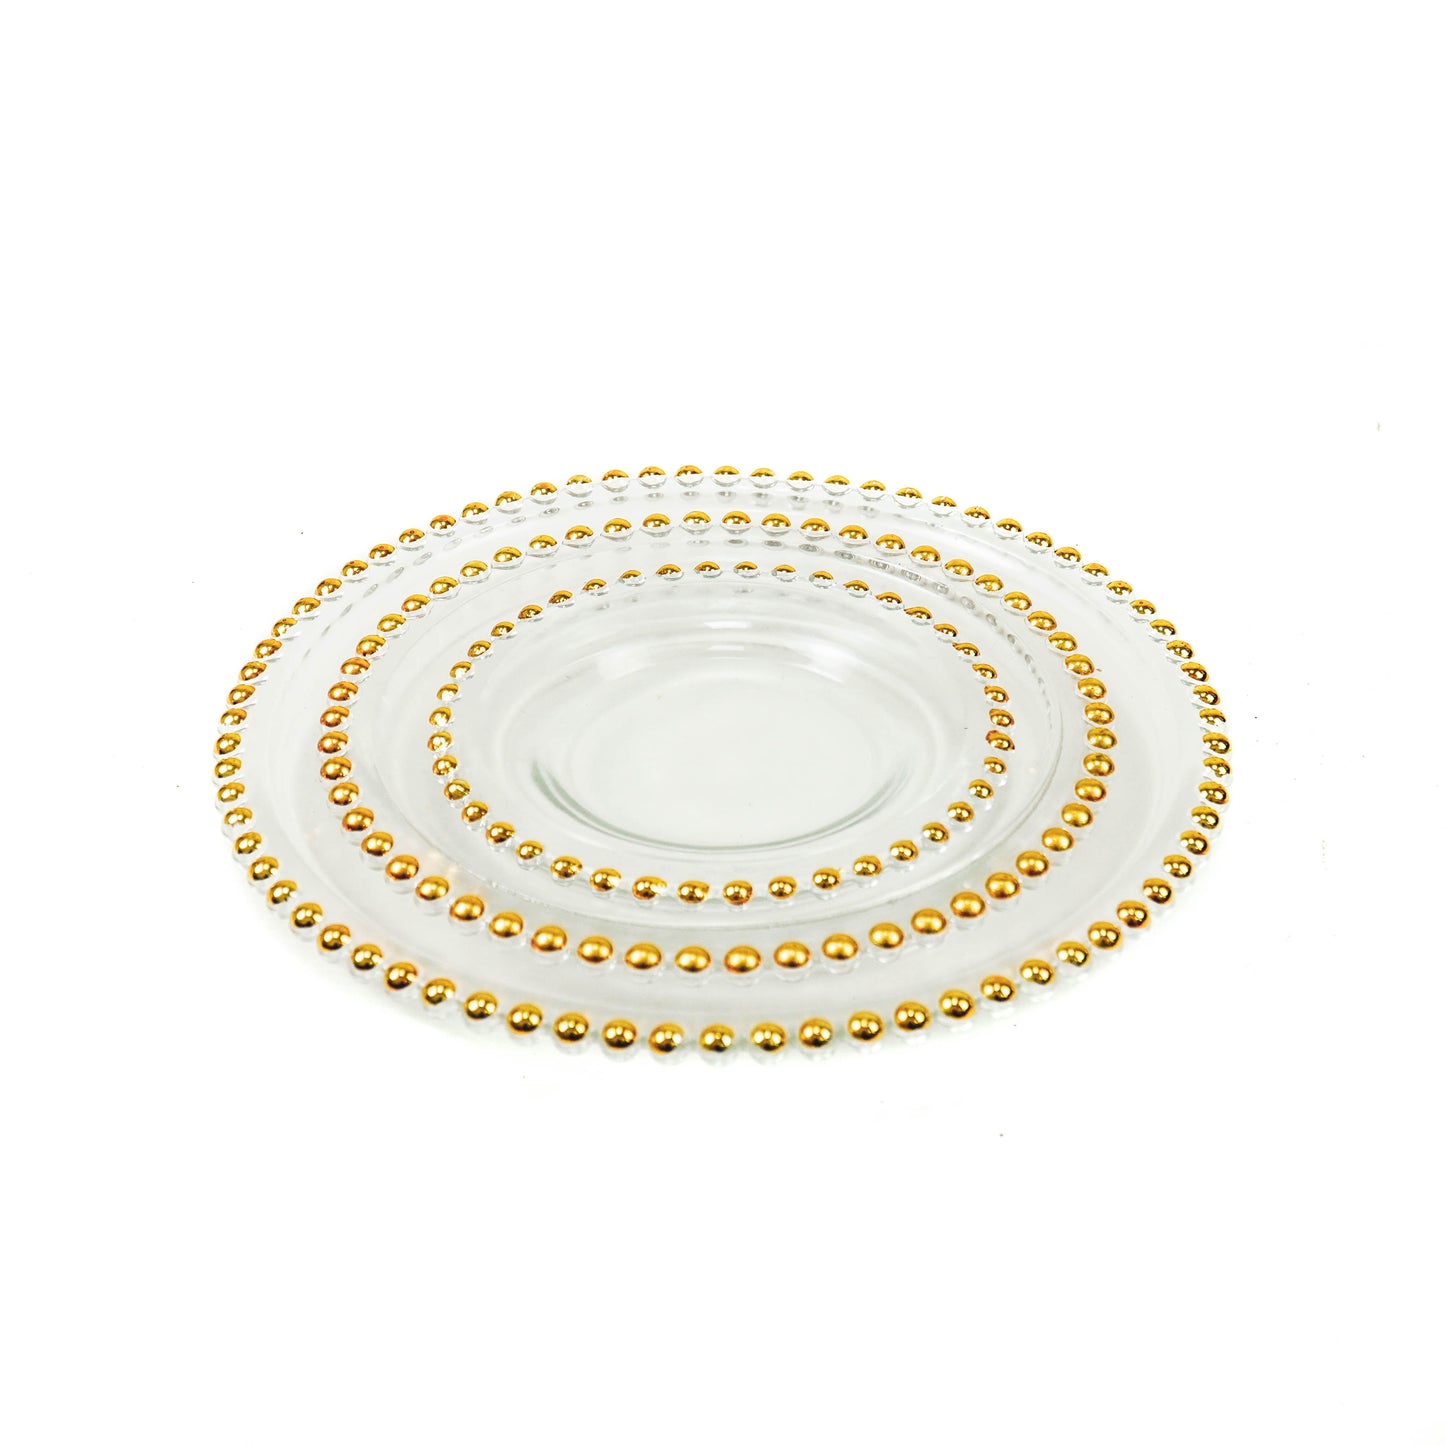 HV Dinnerplate of glass with golden rim - 15.5x1.5cm